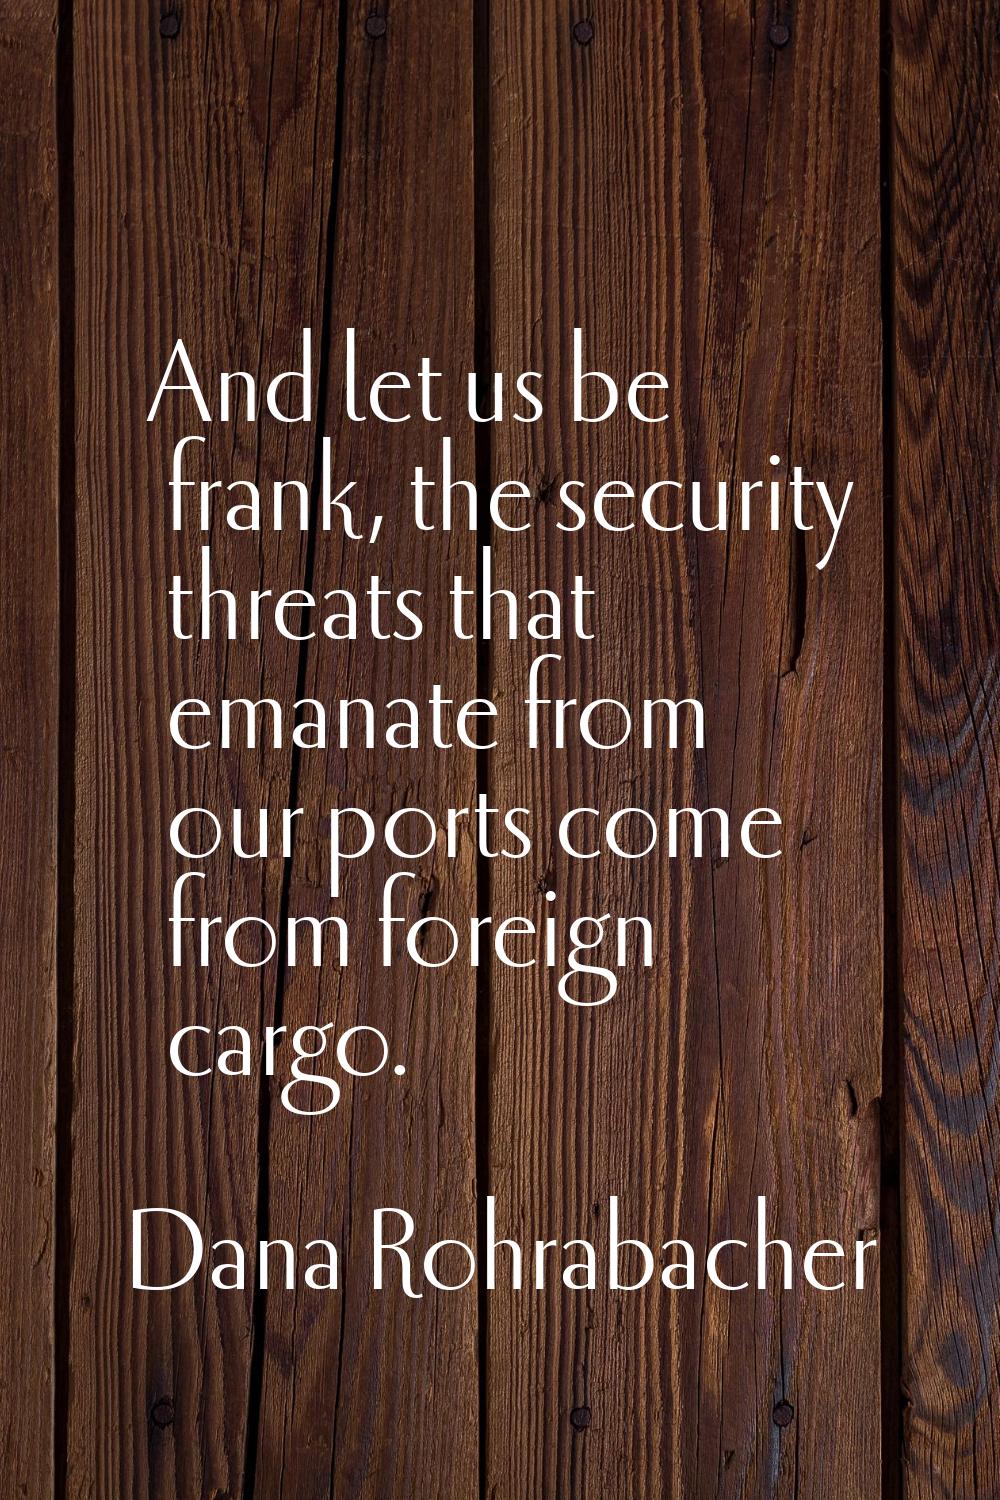 And let us be frank, the security threats that emanate from our ports come from foreign cargo.